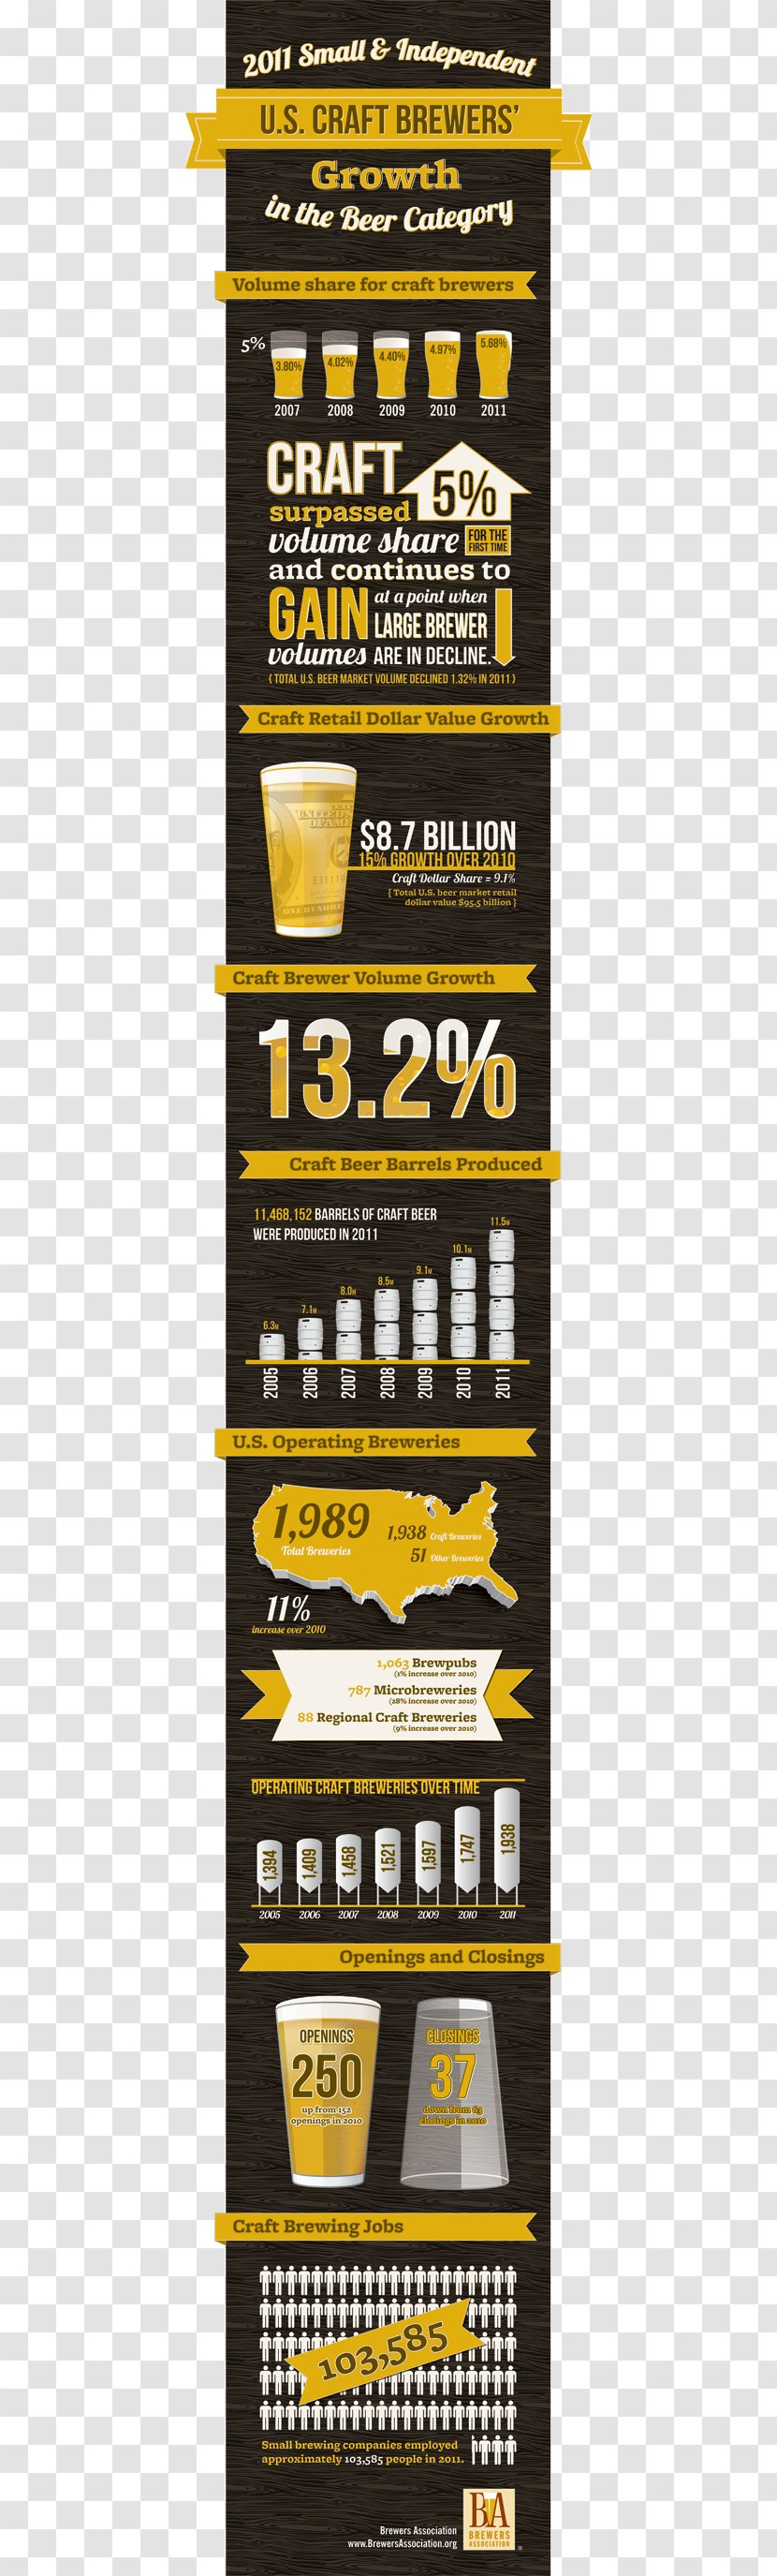 Craft Beer Brewing Grains & Malts Brewers Association Brewery - Homebrewing Winemaking Supplies - Infographic About Us Transparent PNG